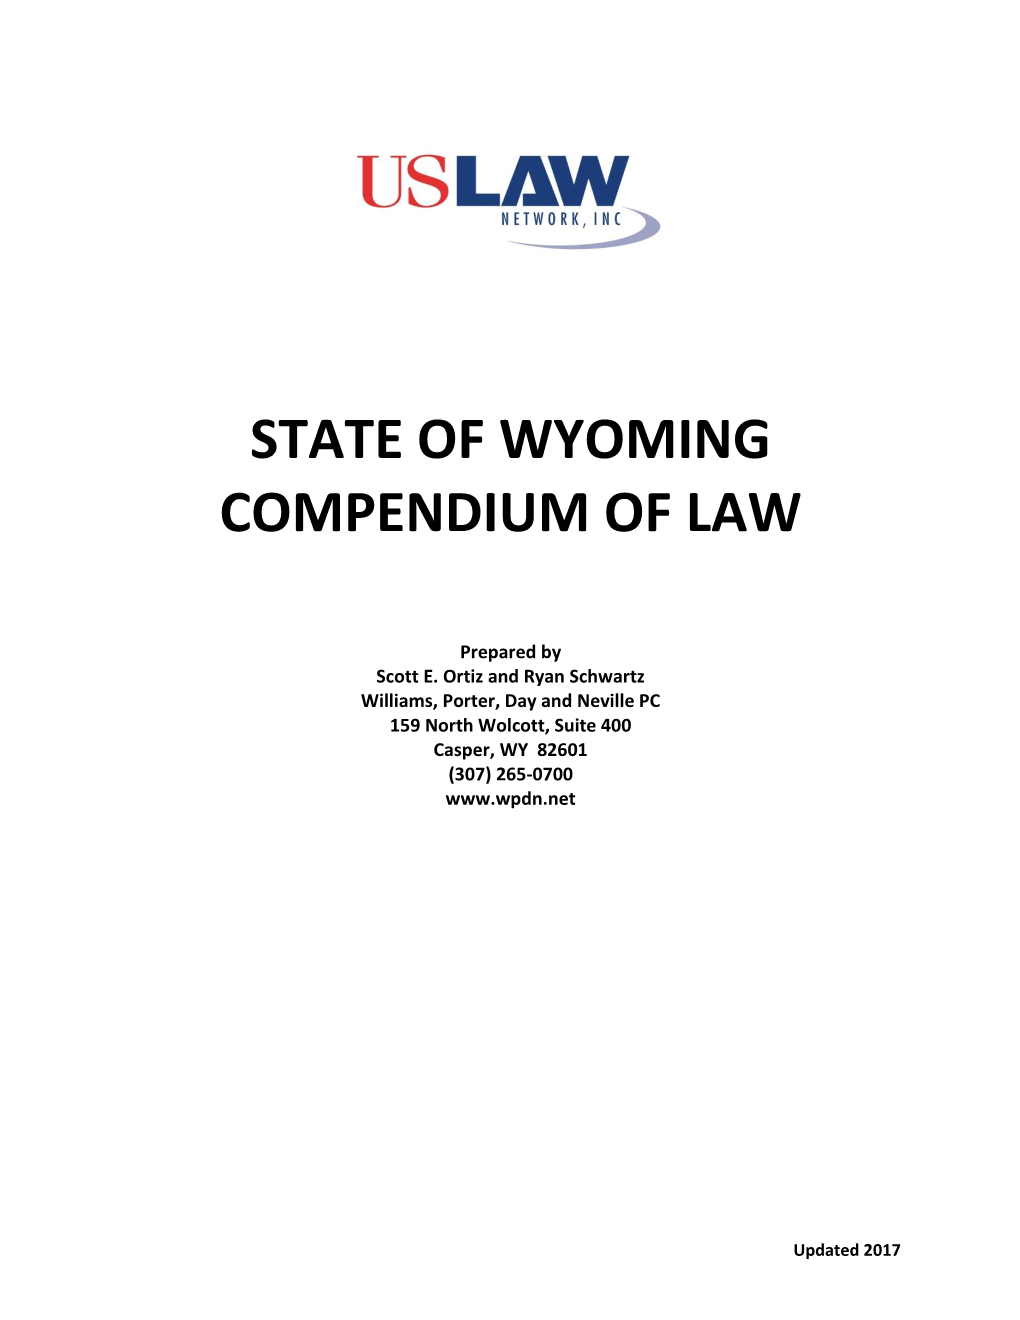 State of Wyoming Compendium of Law